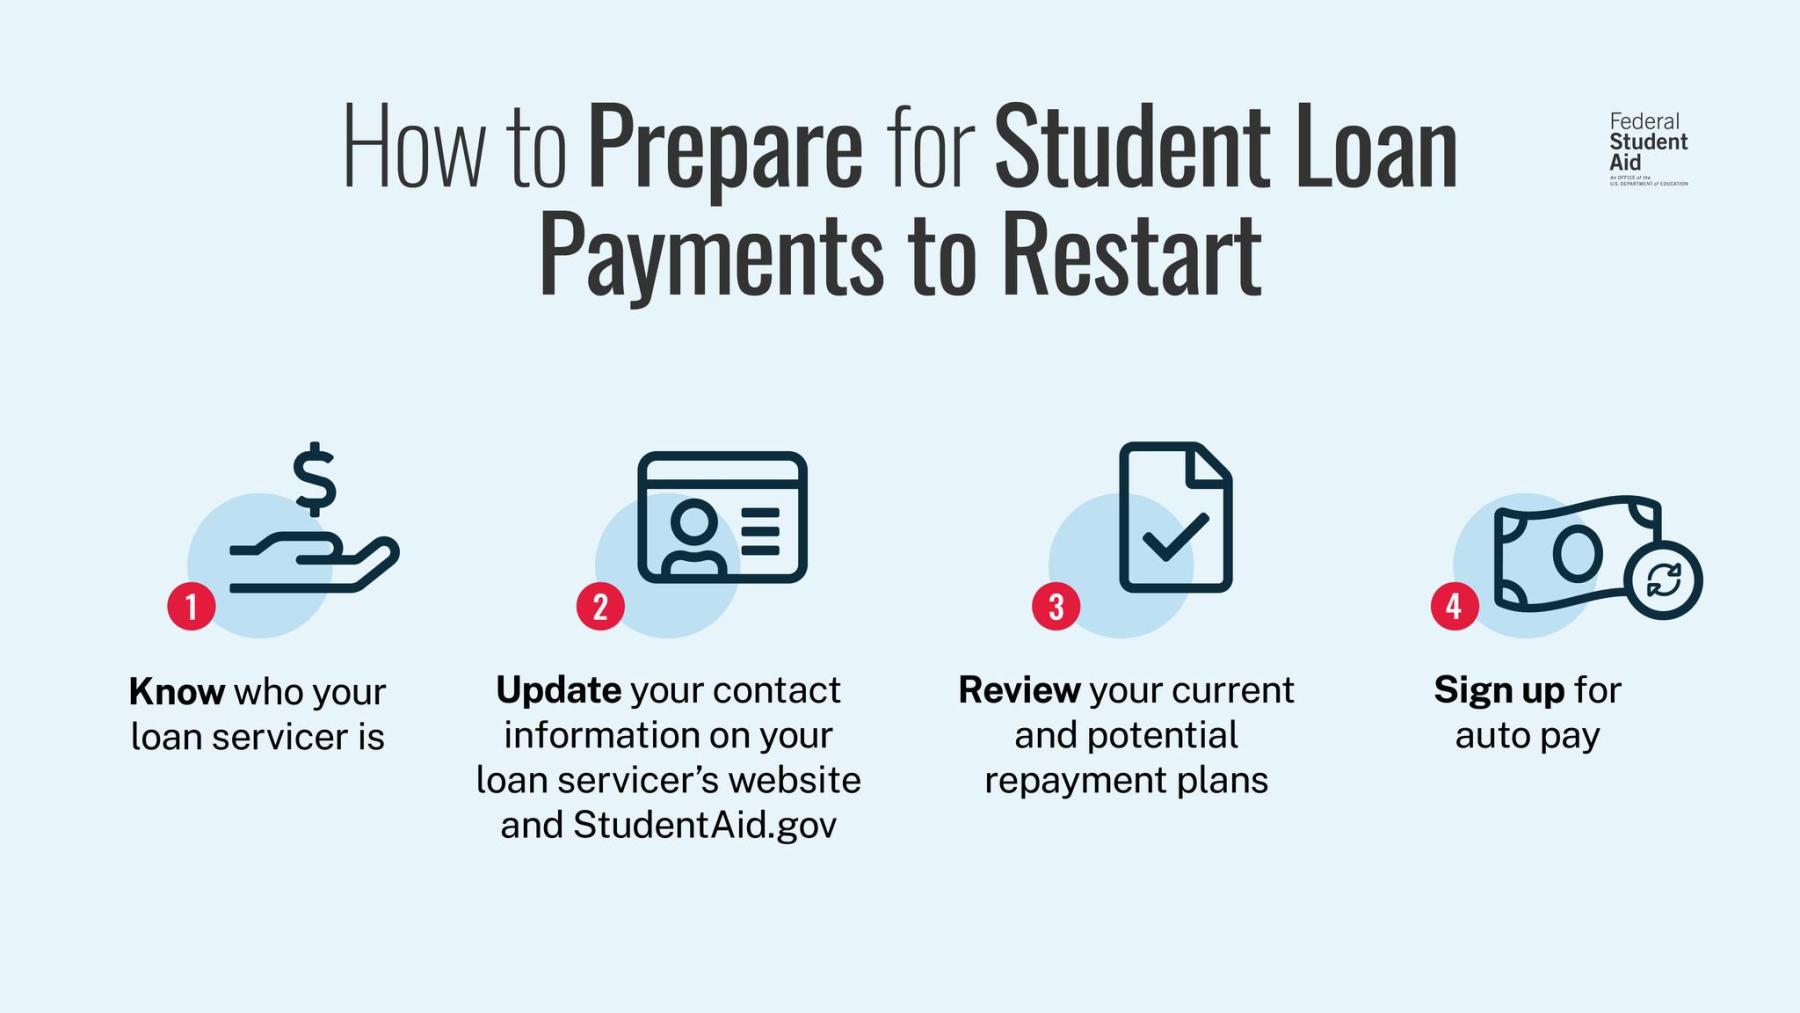 Prepare for Student Loan Payments to Restart Infographic